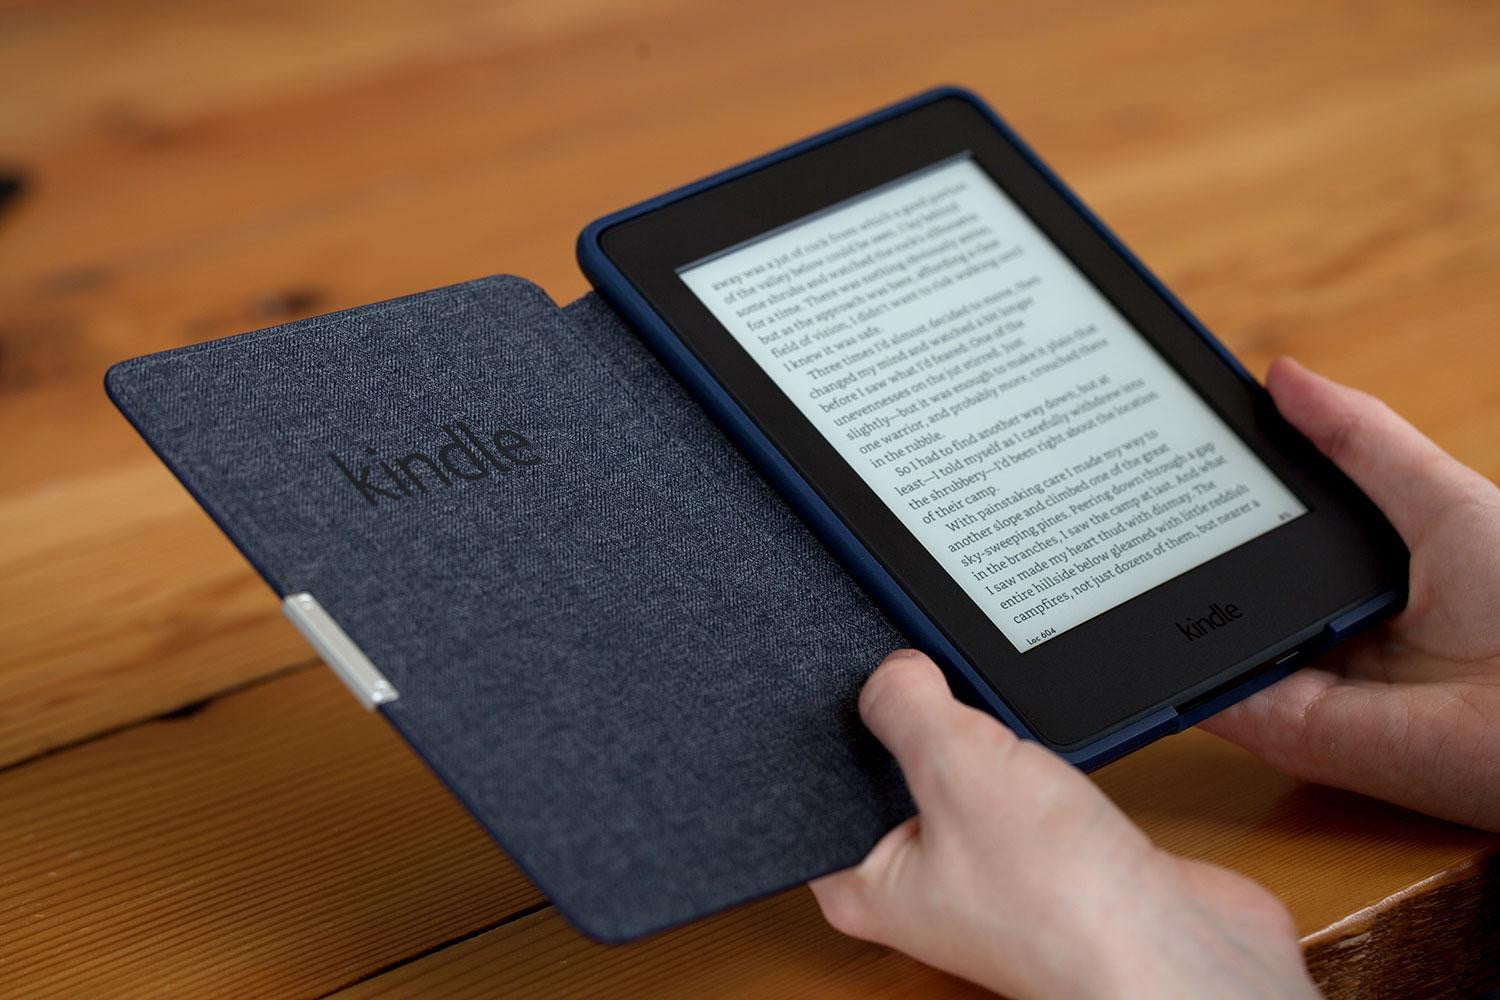 Smart Case with Hand Strap Soft Cover For  Kindle Paperwhite 5 11th  Gen